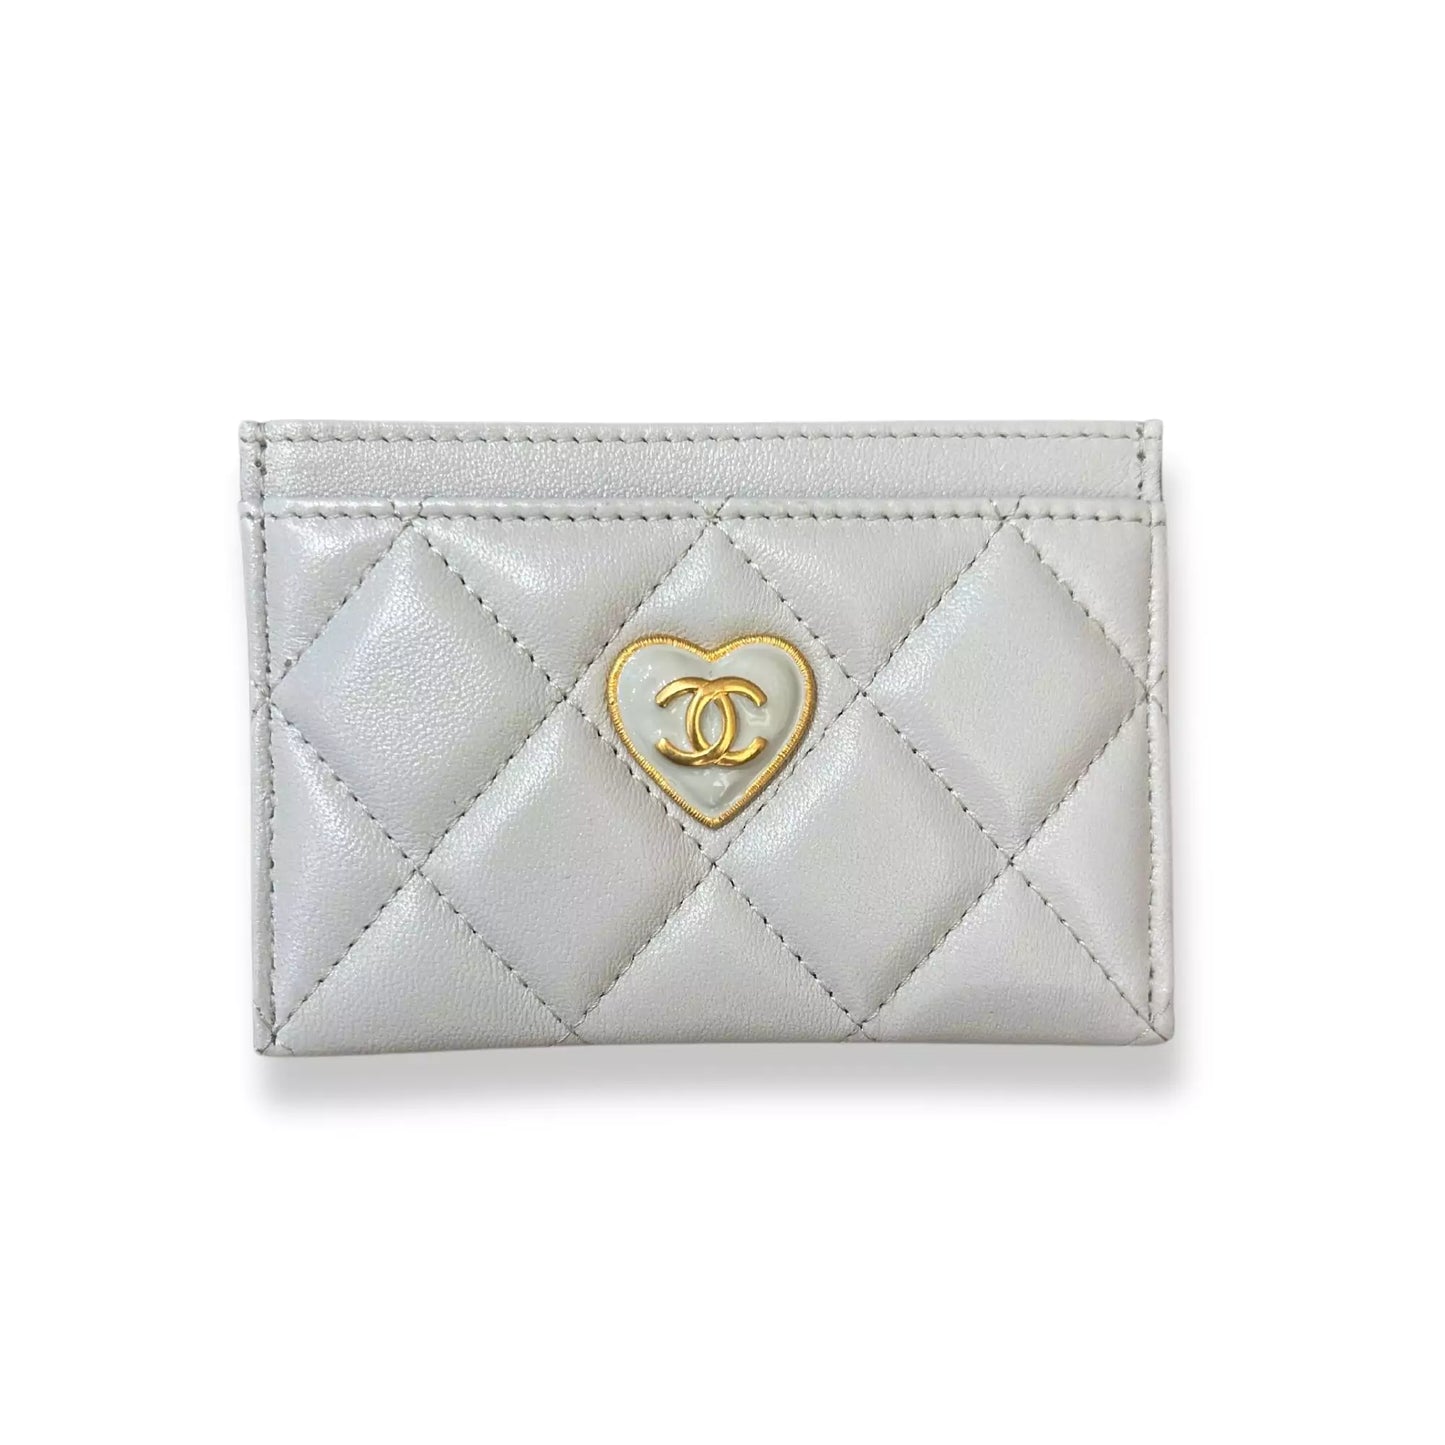 CHANEL BLUE LEATHER CLASSIC CARD HOLDER – EYE LUXURY CONCIERGE